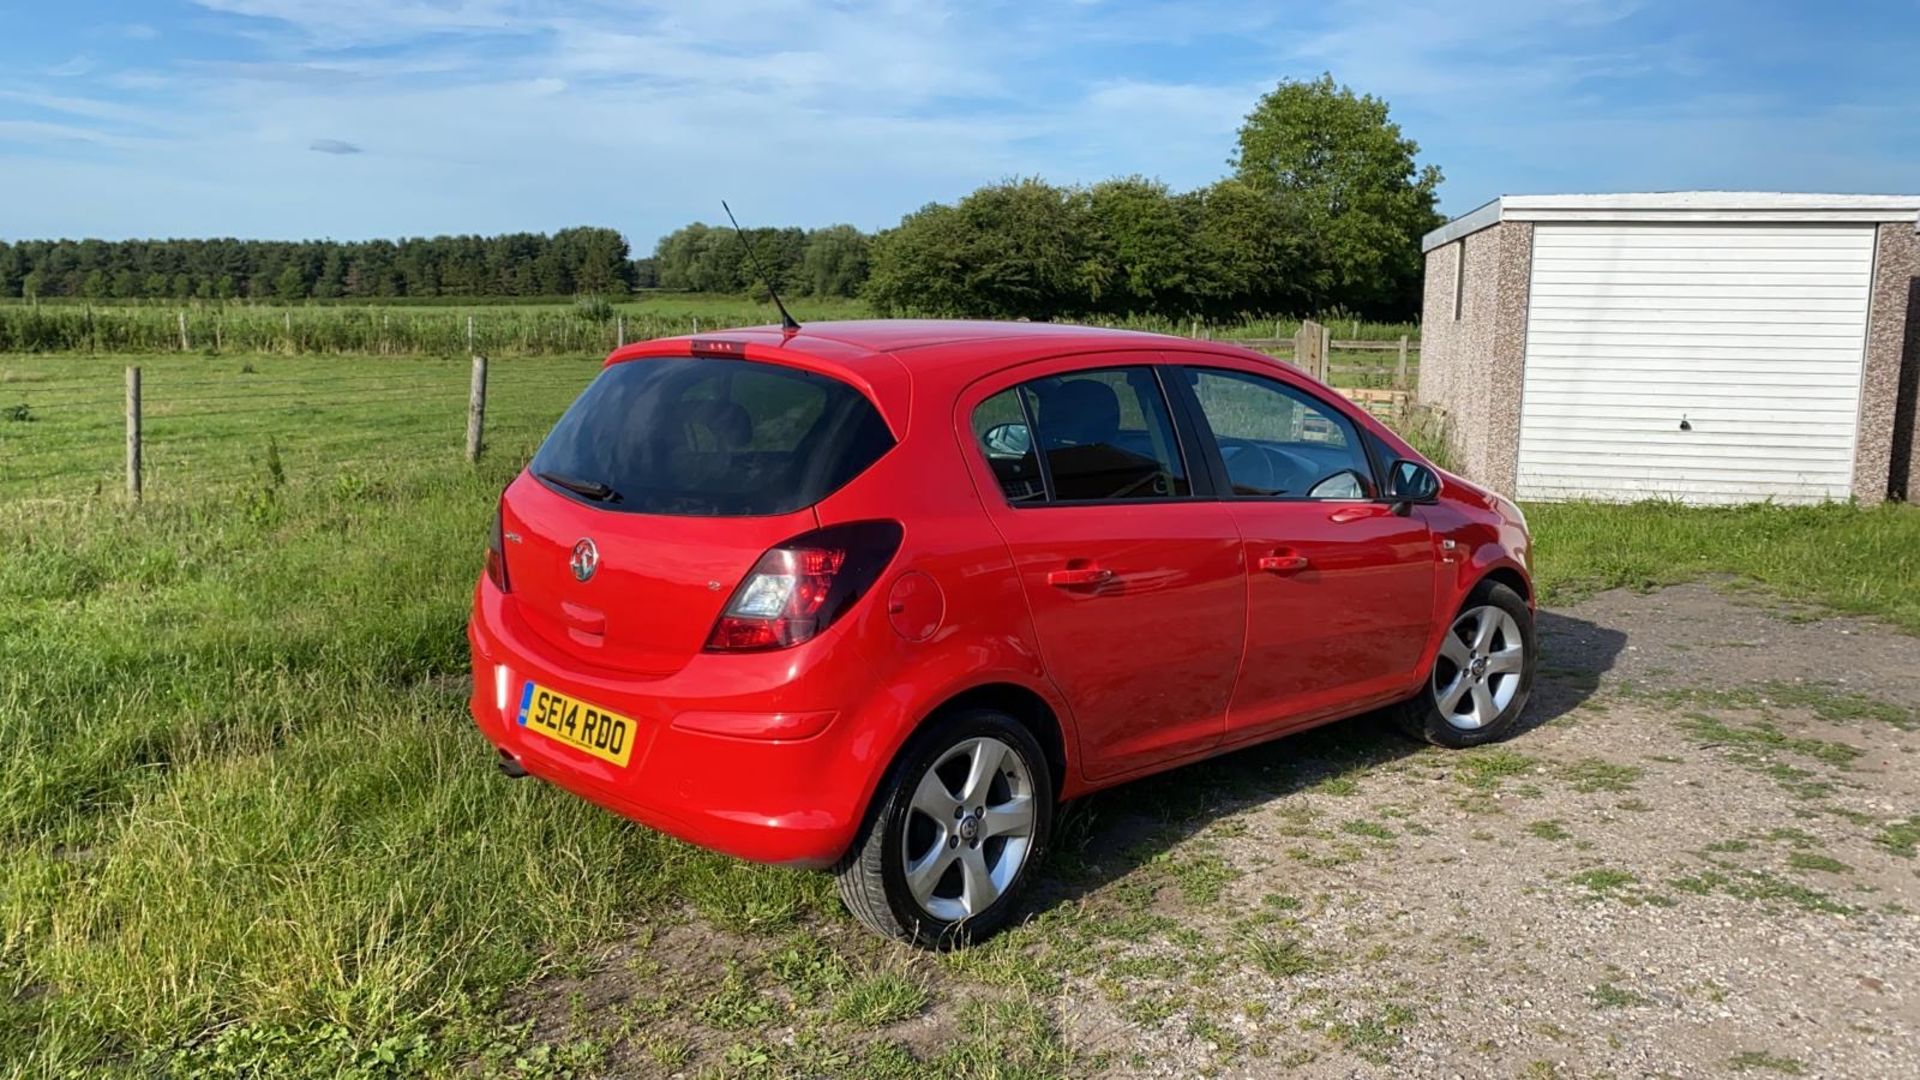 2014/14 REG VAUXHALL CORSA SXI AC ECOFLEX 1.2 PETROL RED 5DR HATCHBACK, SHOWING 2 FORMER KEEPERS - Image 7 of 12